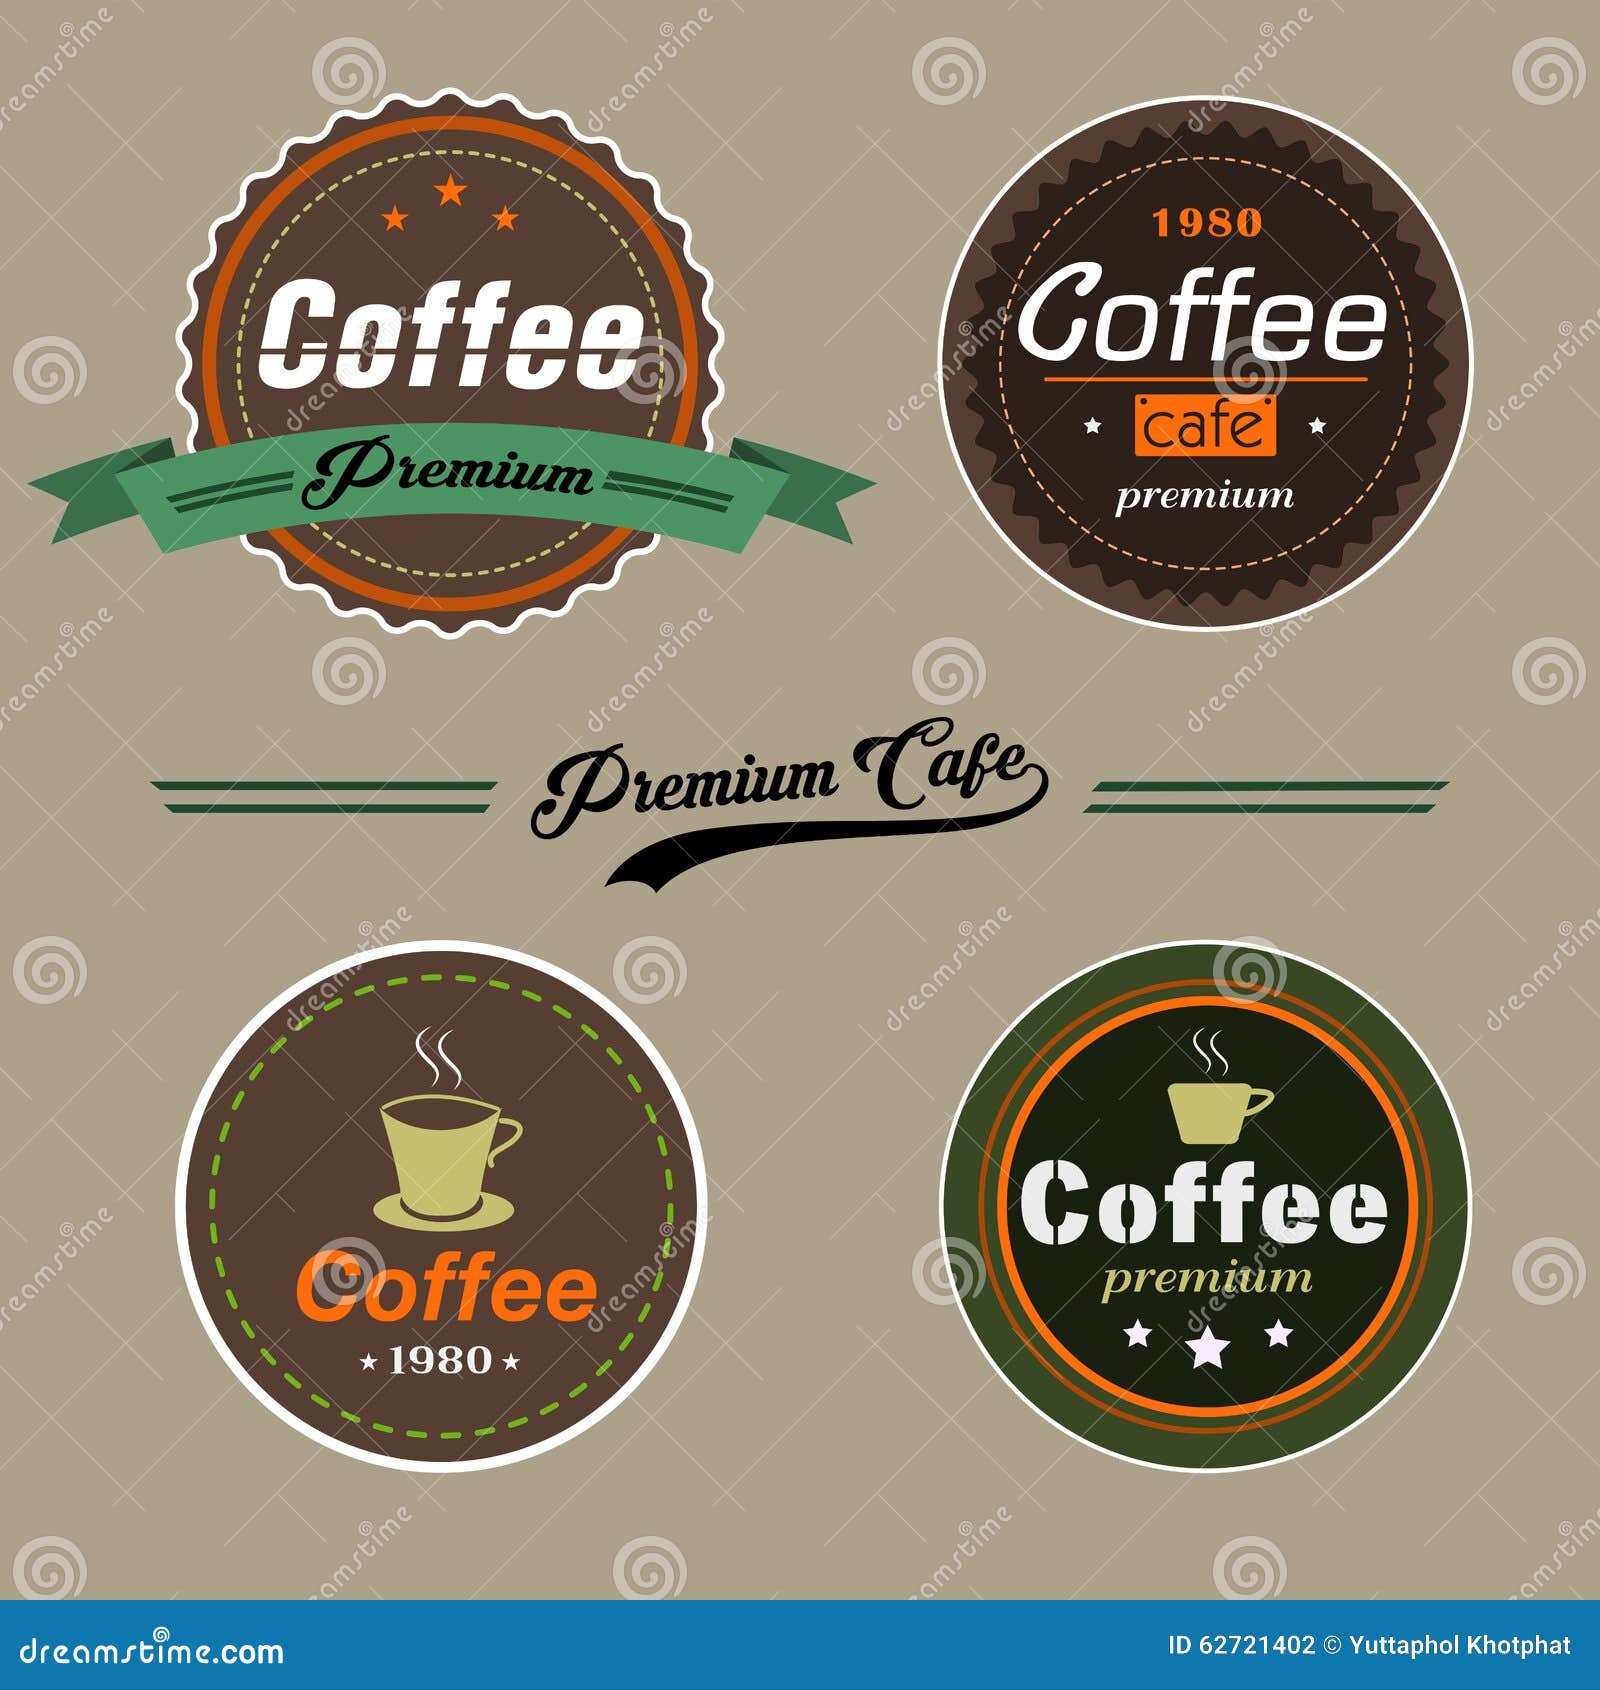 https://thumbs.dreamstime.com/z/set-vector-coffee-elements-logo-label-vintage-style-can-be-used-as-icon-premium-quality-shop-restaurant-cup-62721402.jpg